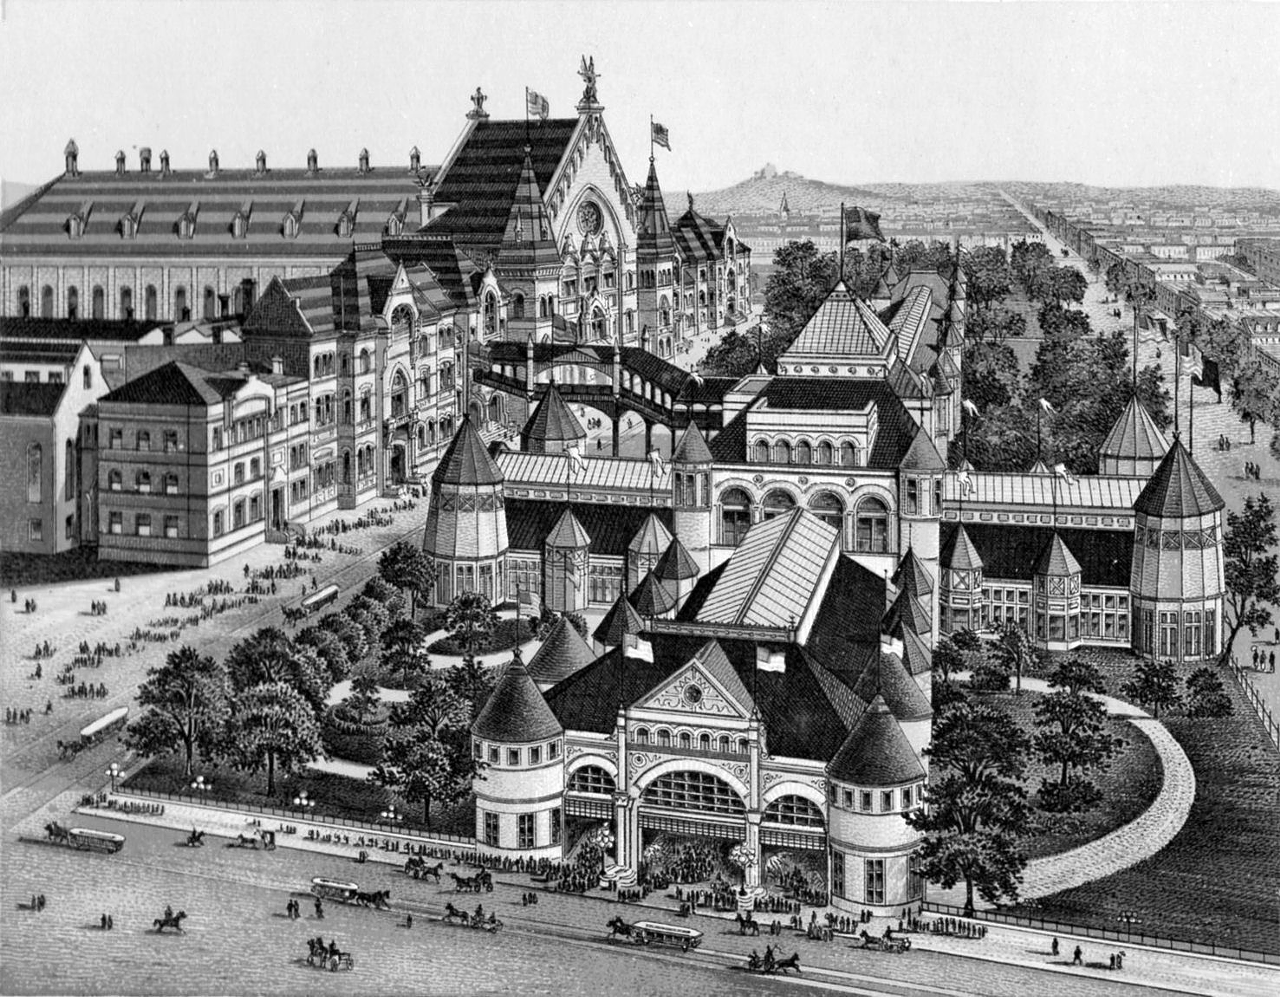 An illustration of Music Hall and Park Hall in Washington Park. At the expo, the center of activities revolved around the recently constructed Music Hall. It was completed in 1878 in part to house this and other expositions, along with choral festivals. The giant auditorium served as the anchor for the temporary buildings erected in and around Washington Park — Machinery Hall and Park Hall — to create the largest connected covered area ever used for an exposition on the continent.